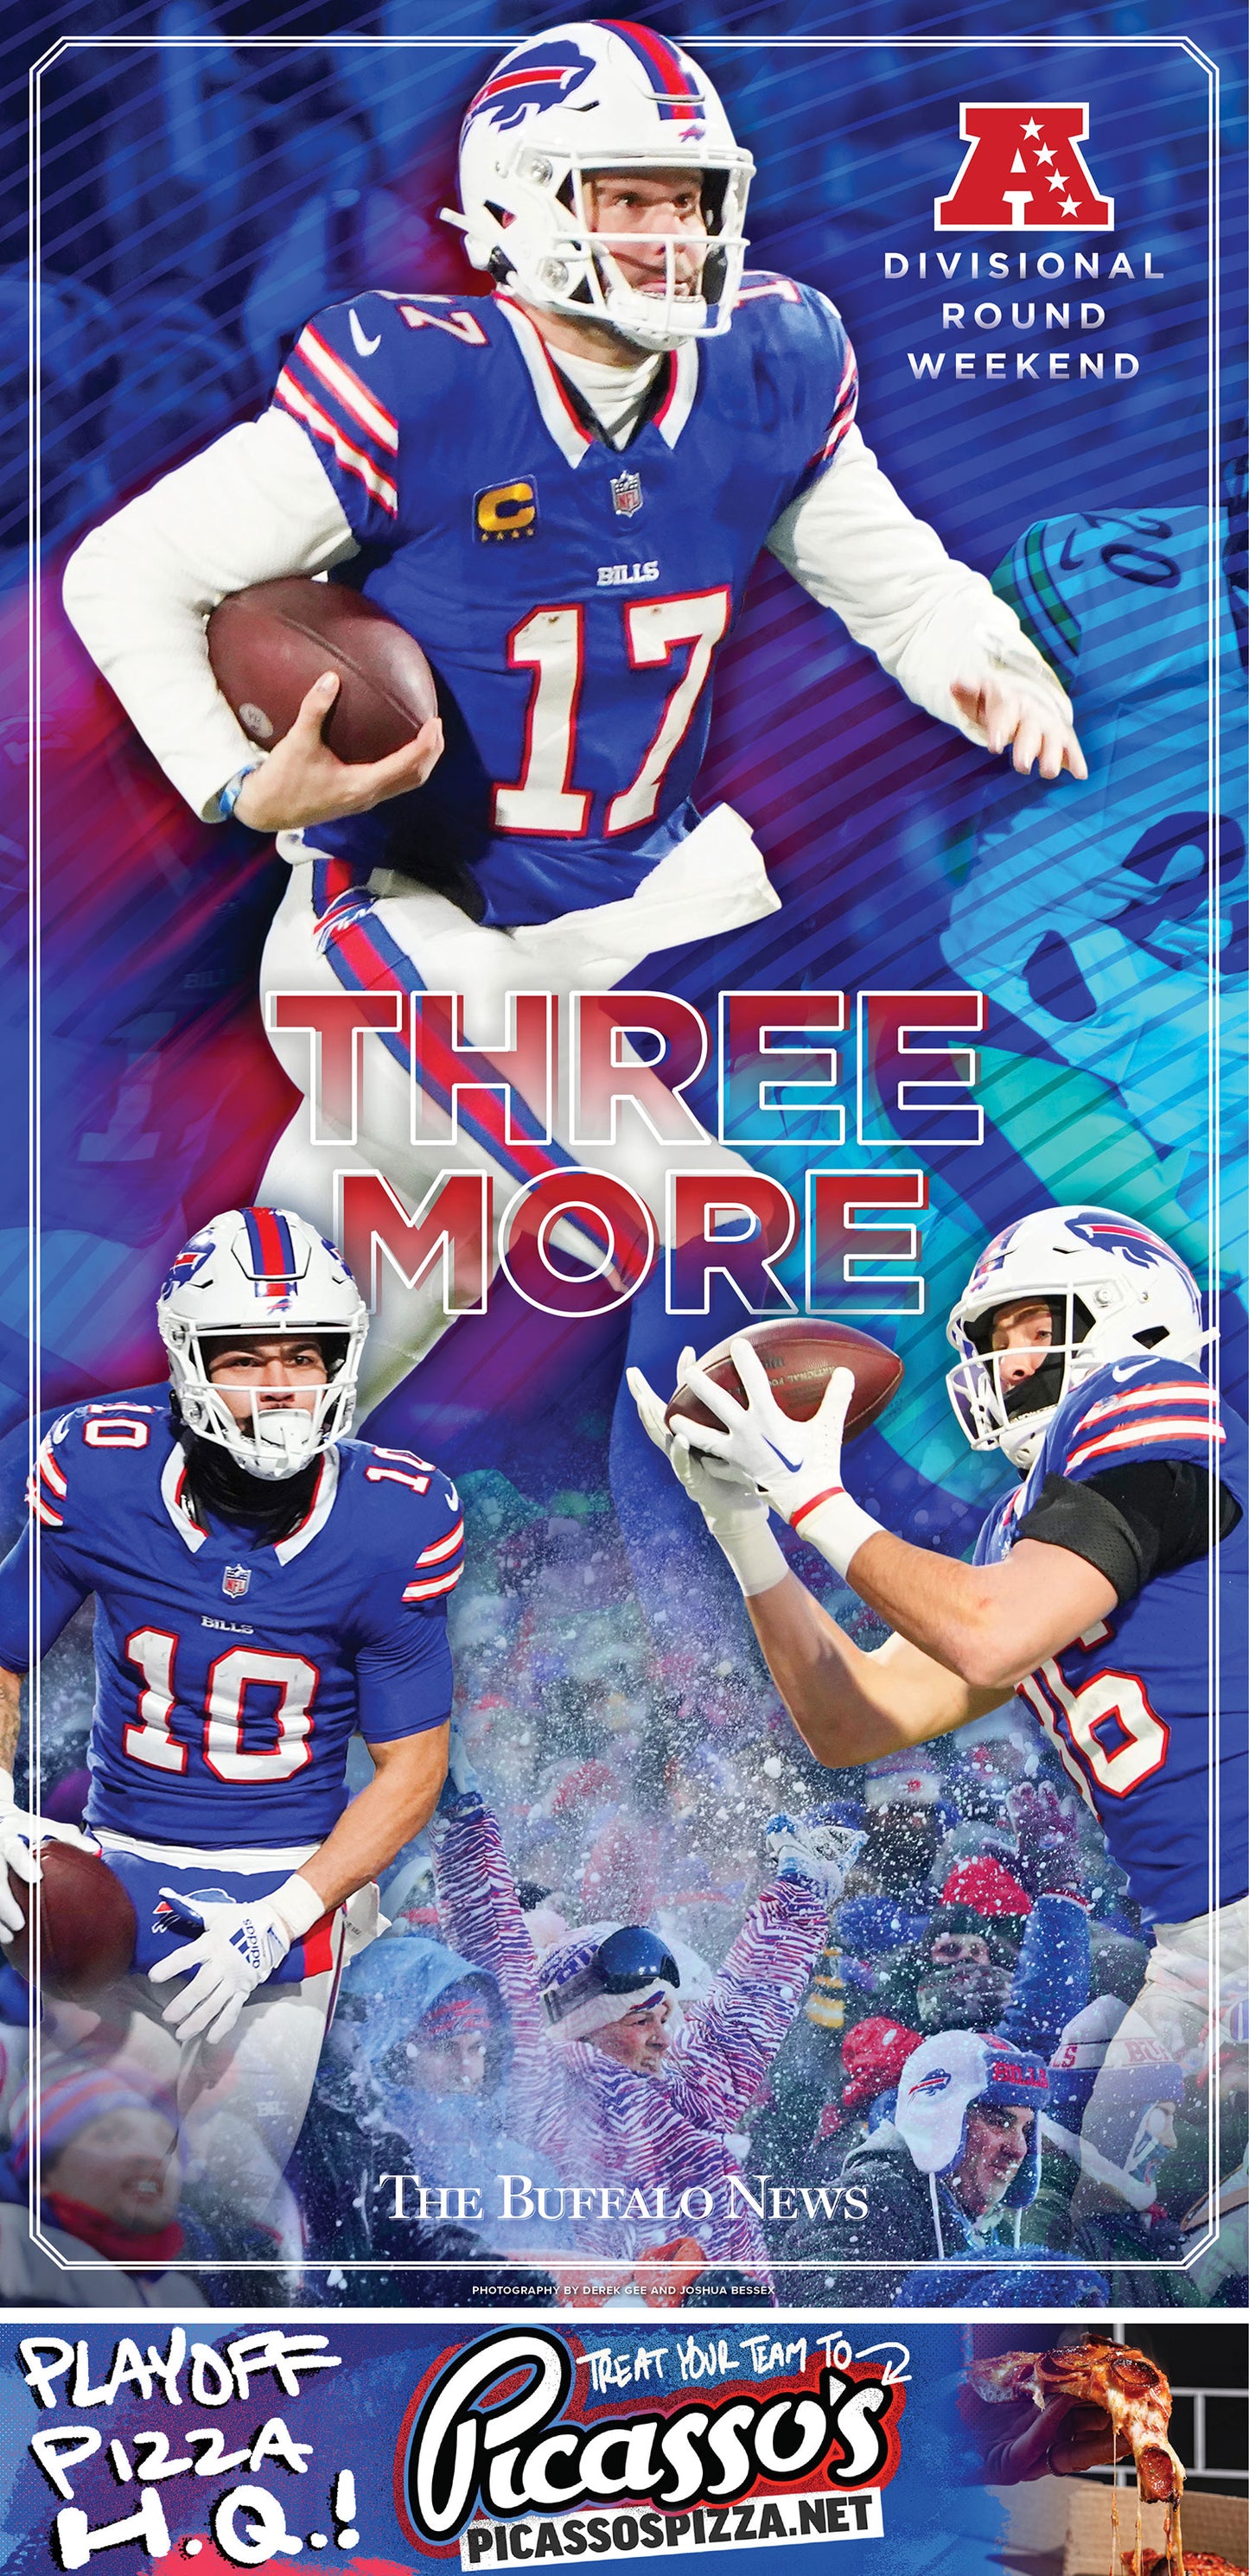 Divisional Round Weekend | The Buffalo News sports page poster